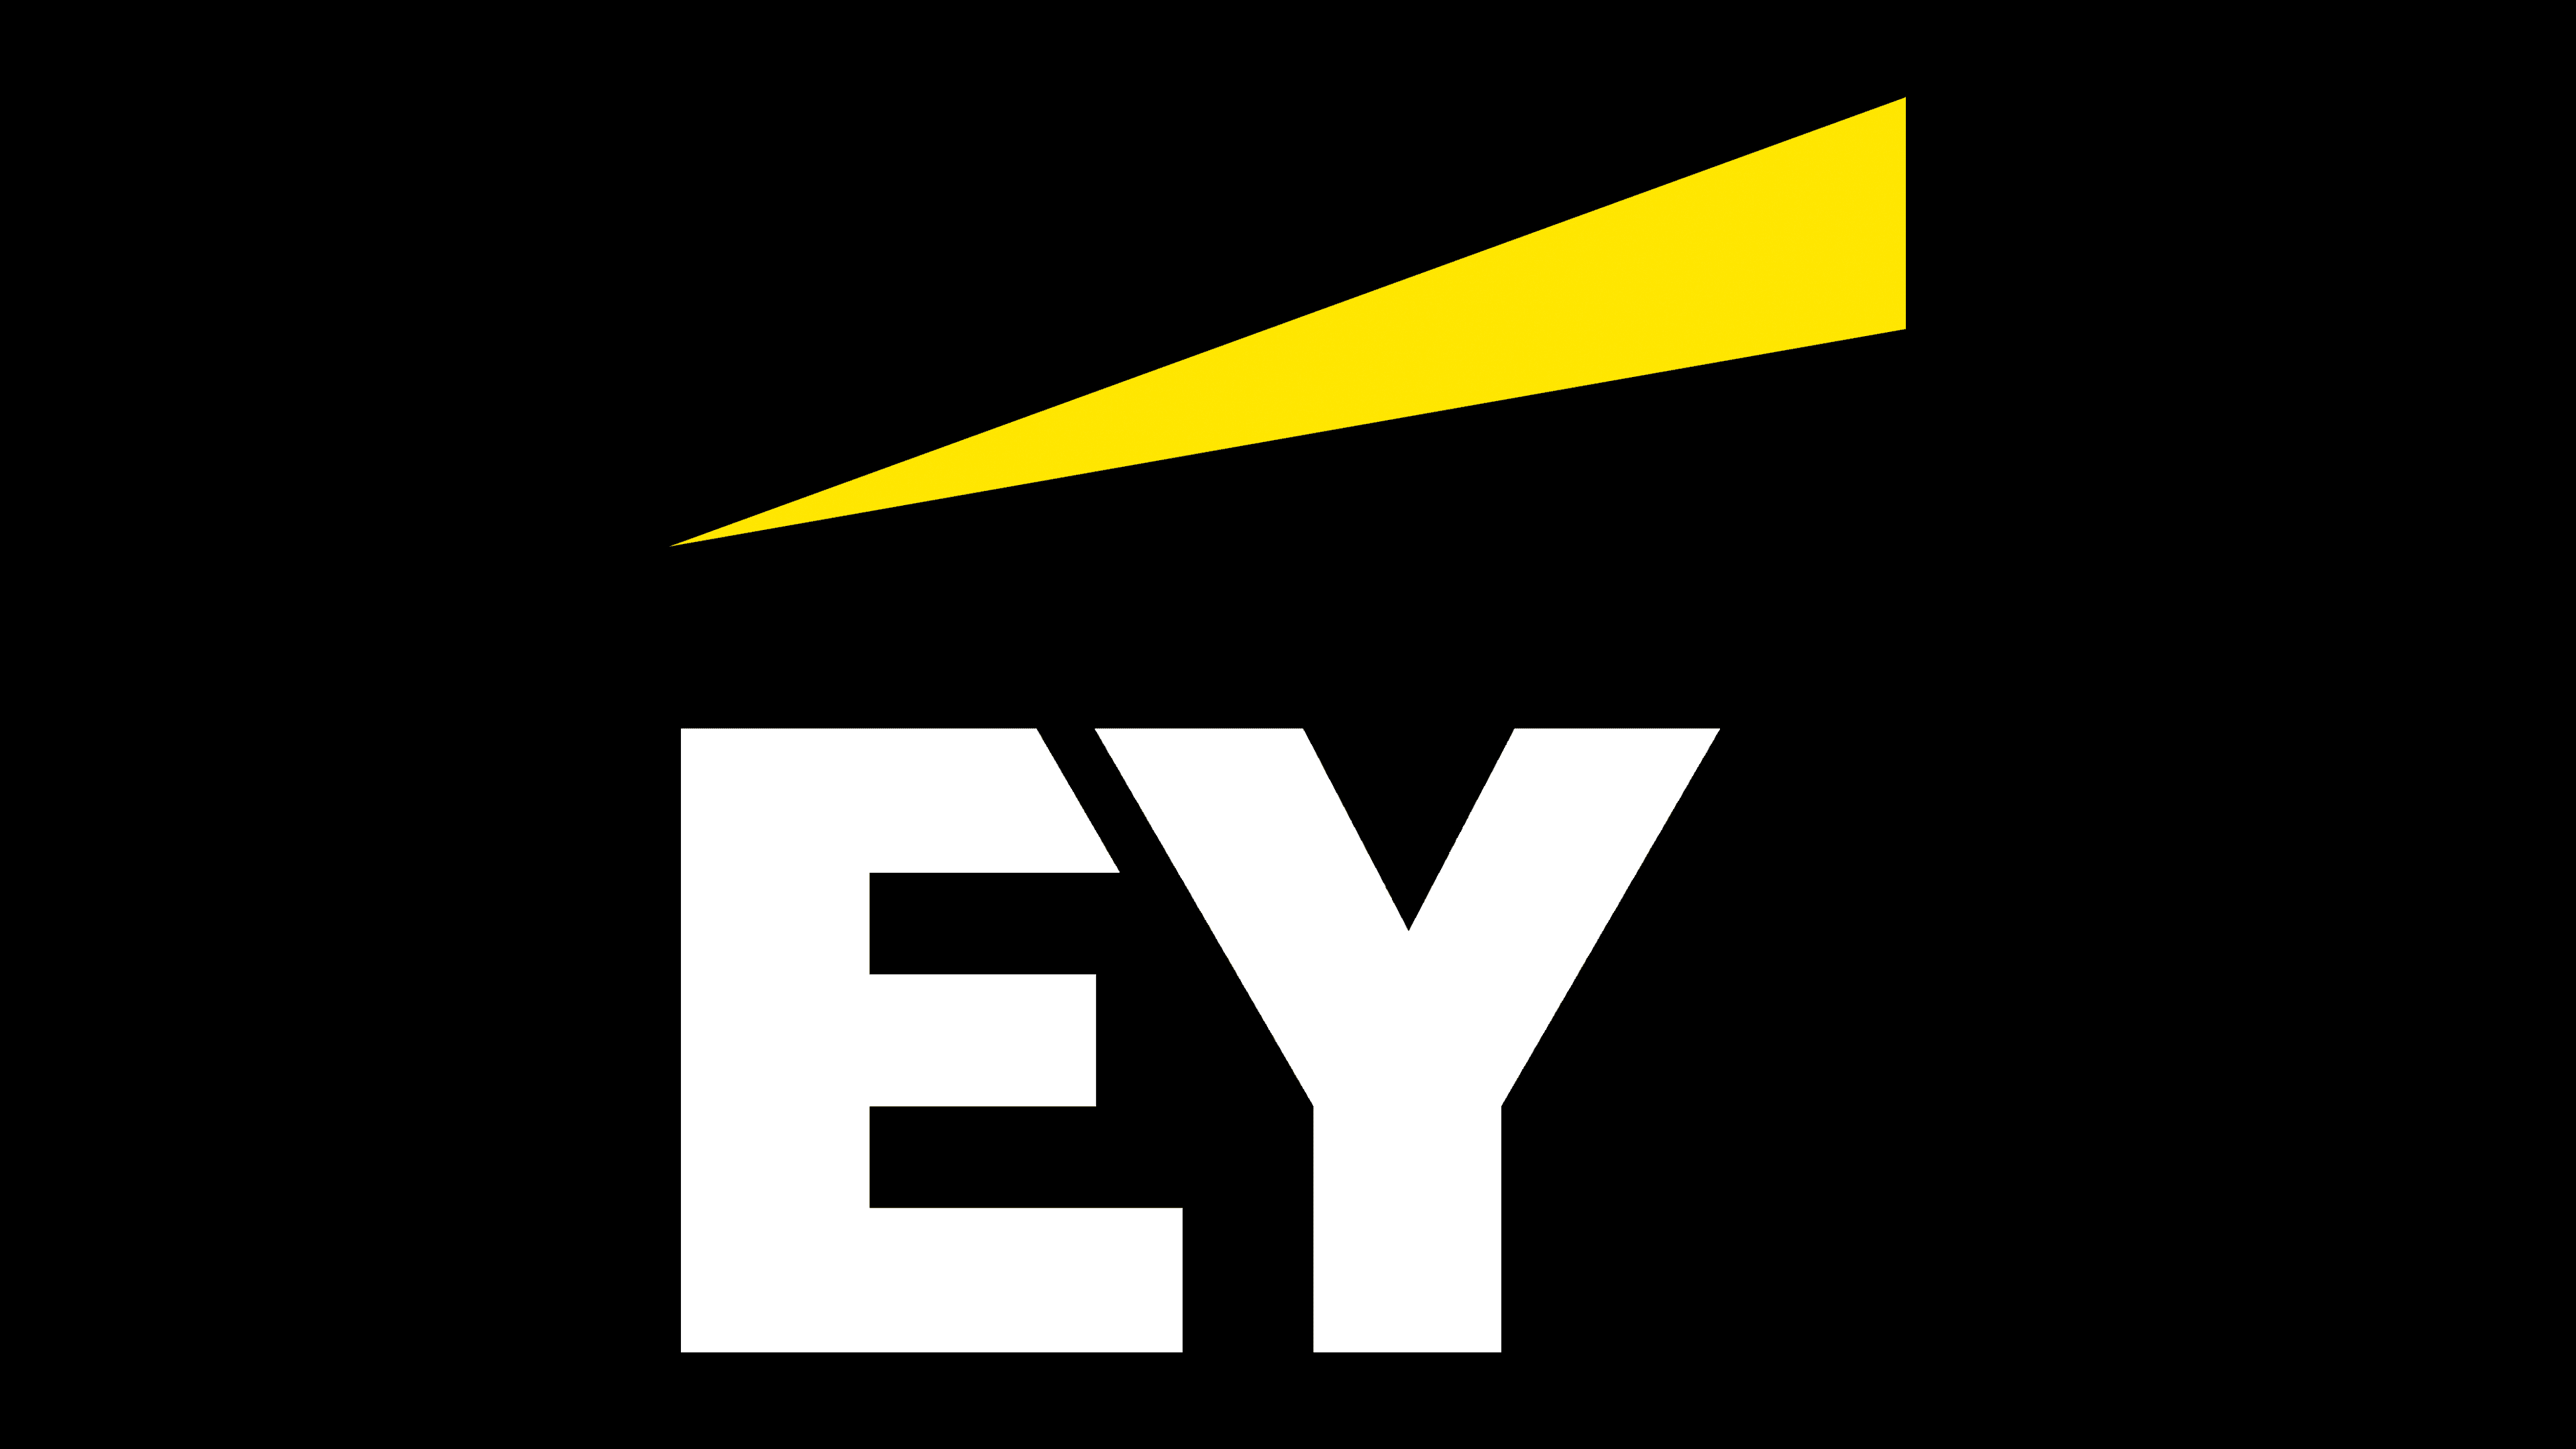 Ernst & Young Logo, symbol, meaning, history, PNG, brand